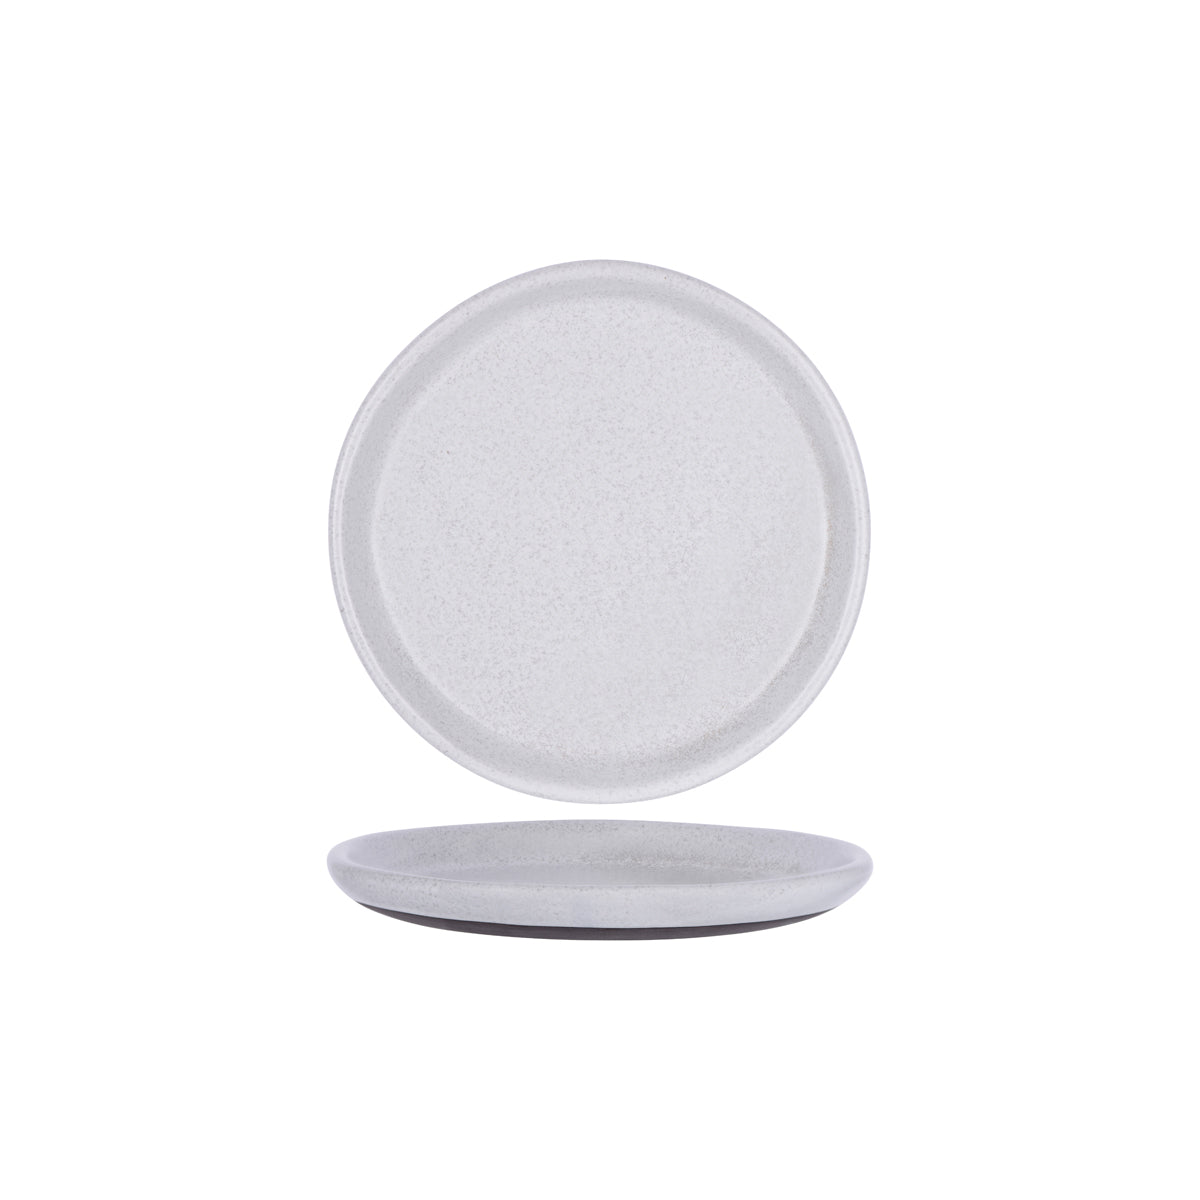 905206 Tablekraft Naturals Ash Grey Round Coupe Plate 265mm Tomkin Australia Hospitality Supplies